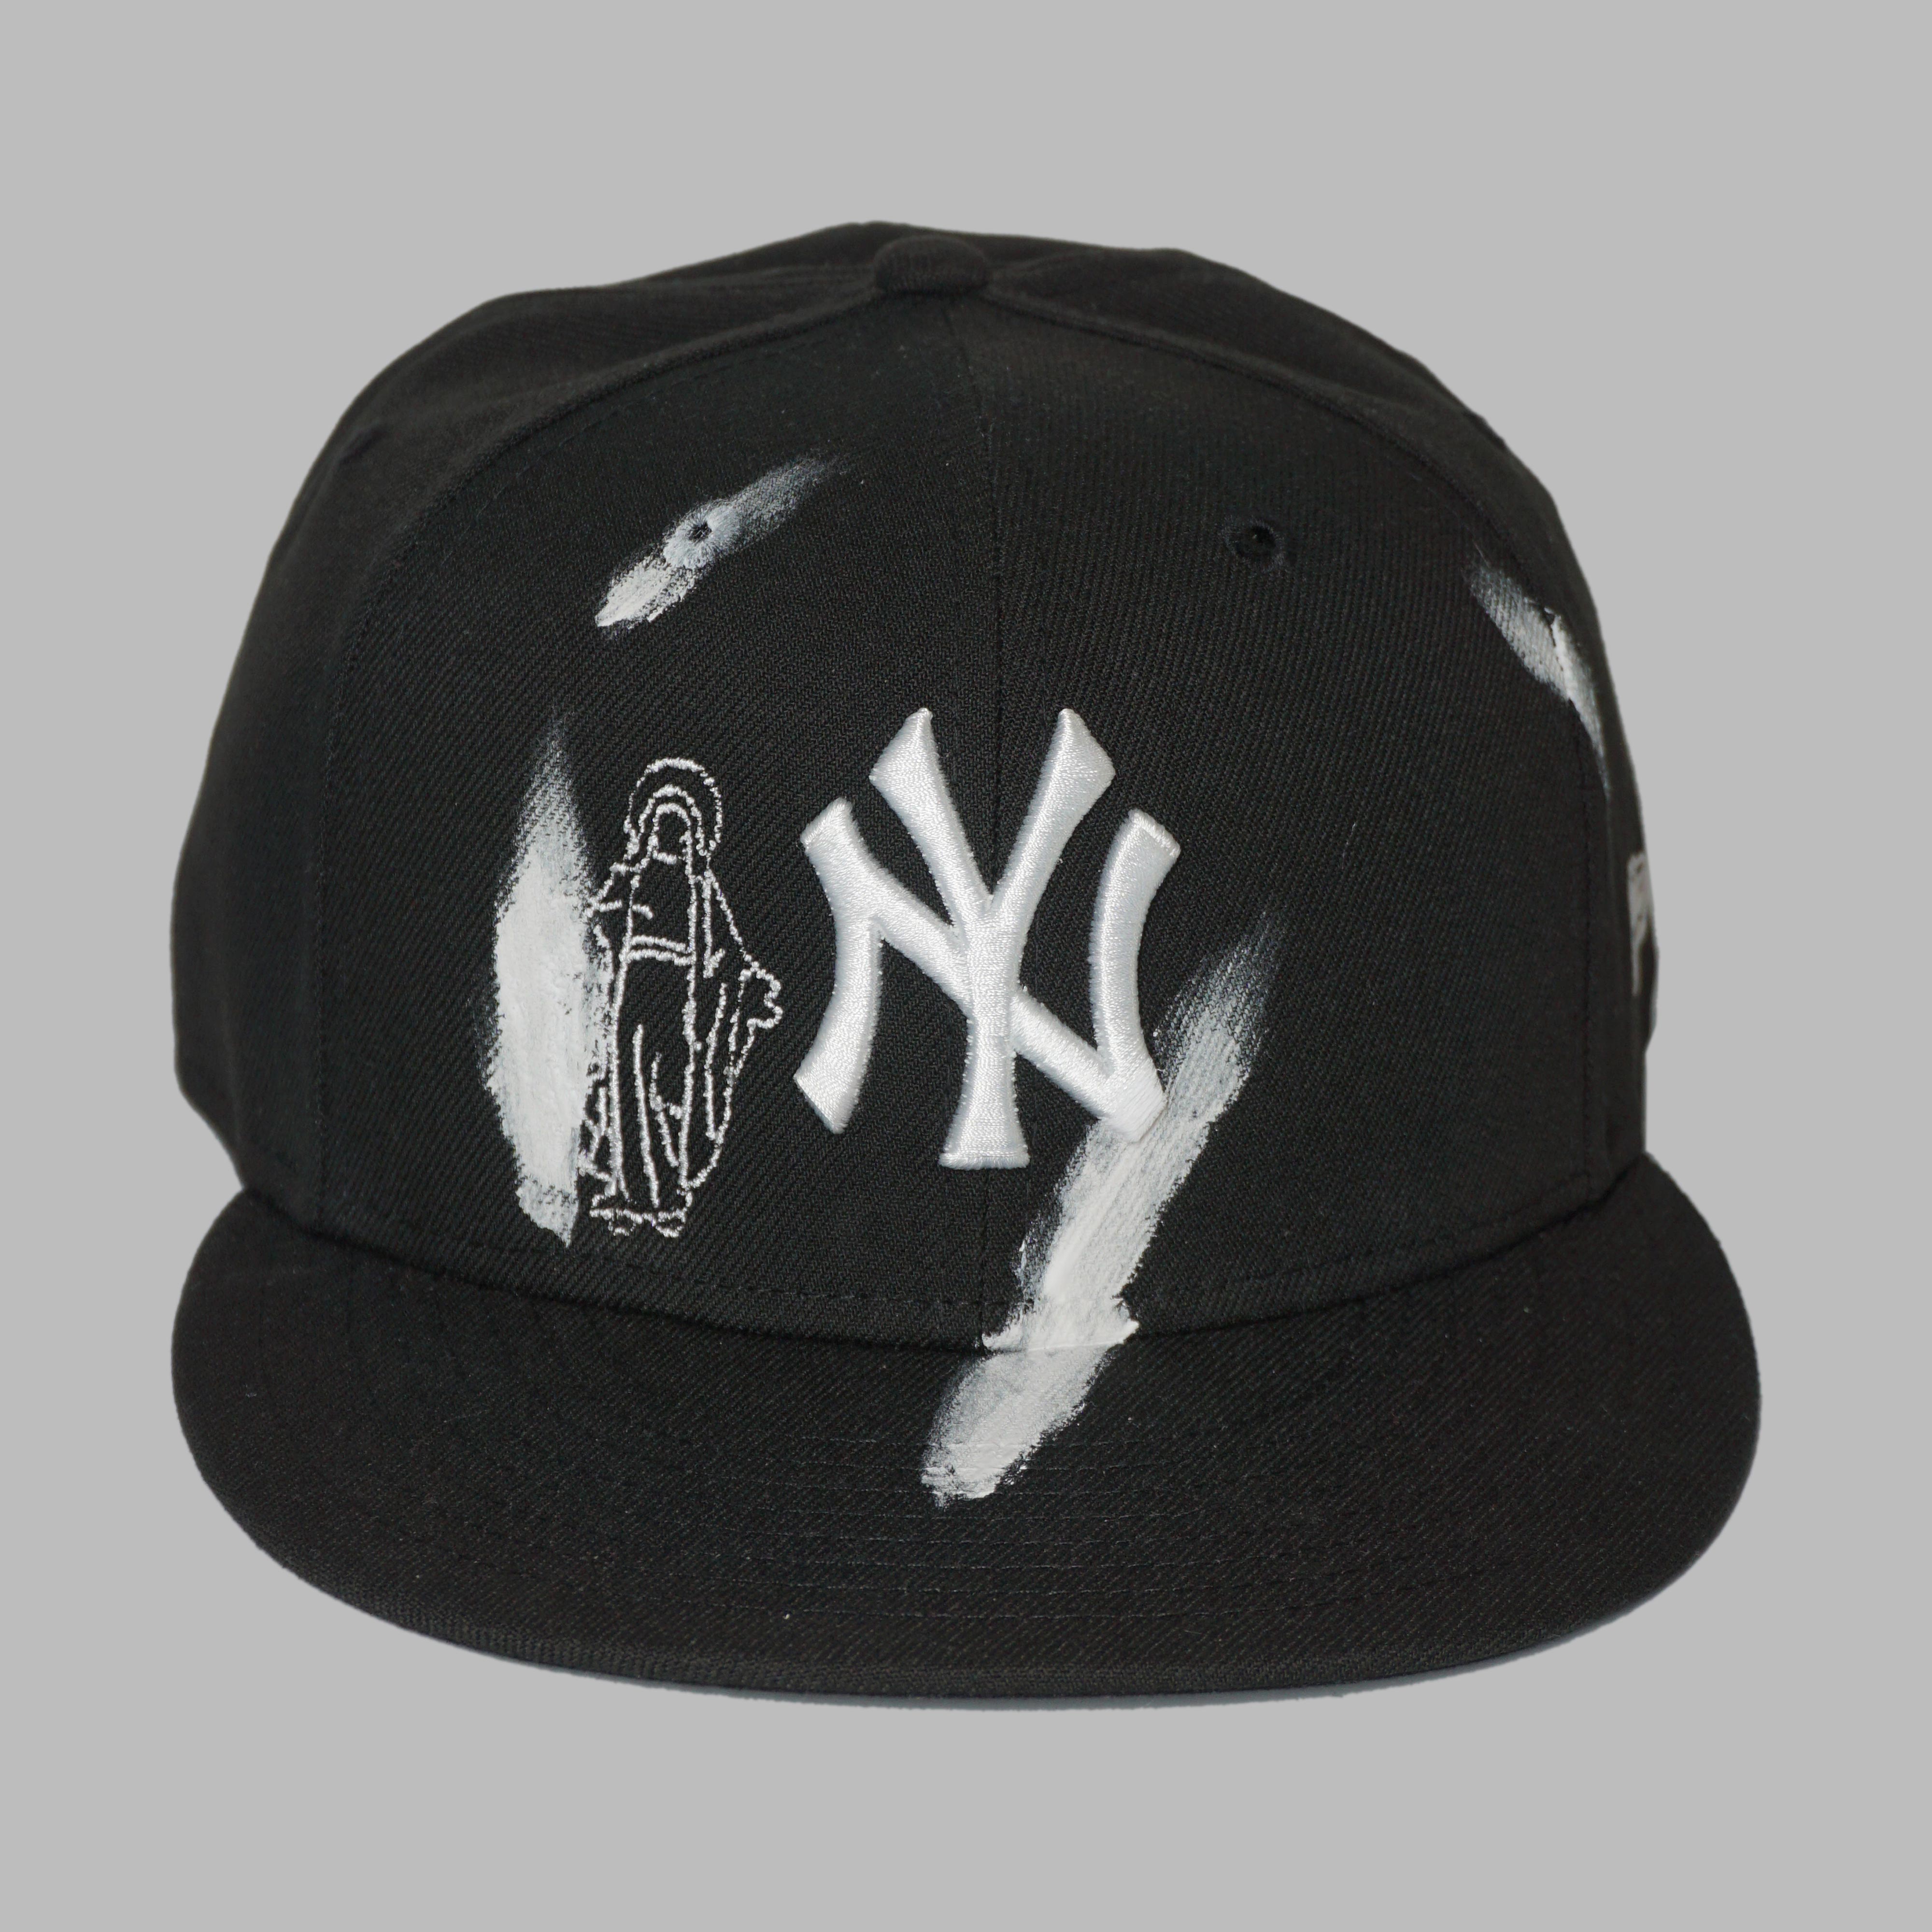 PAINTED BLACK HOLY FITTED (size 7 3/4)